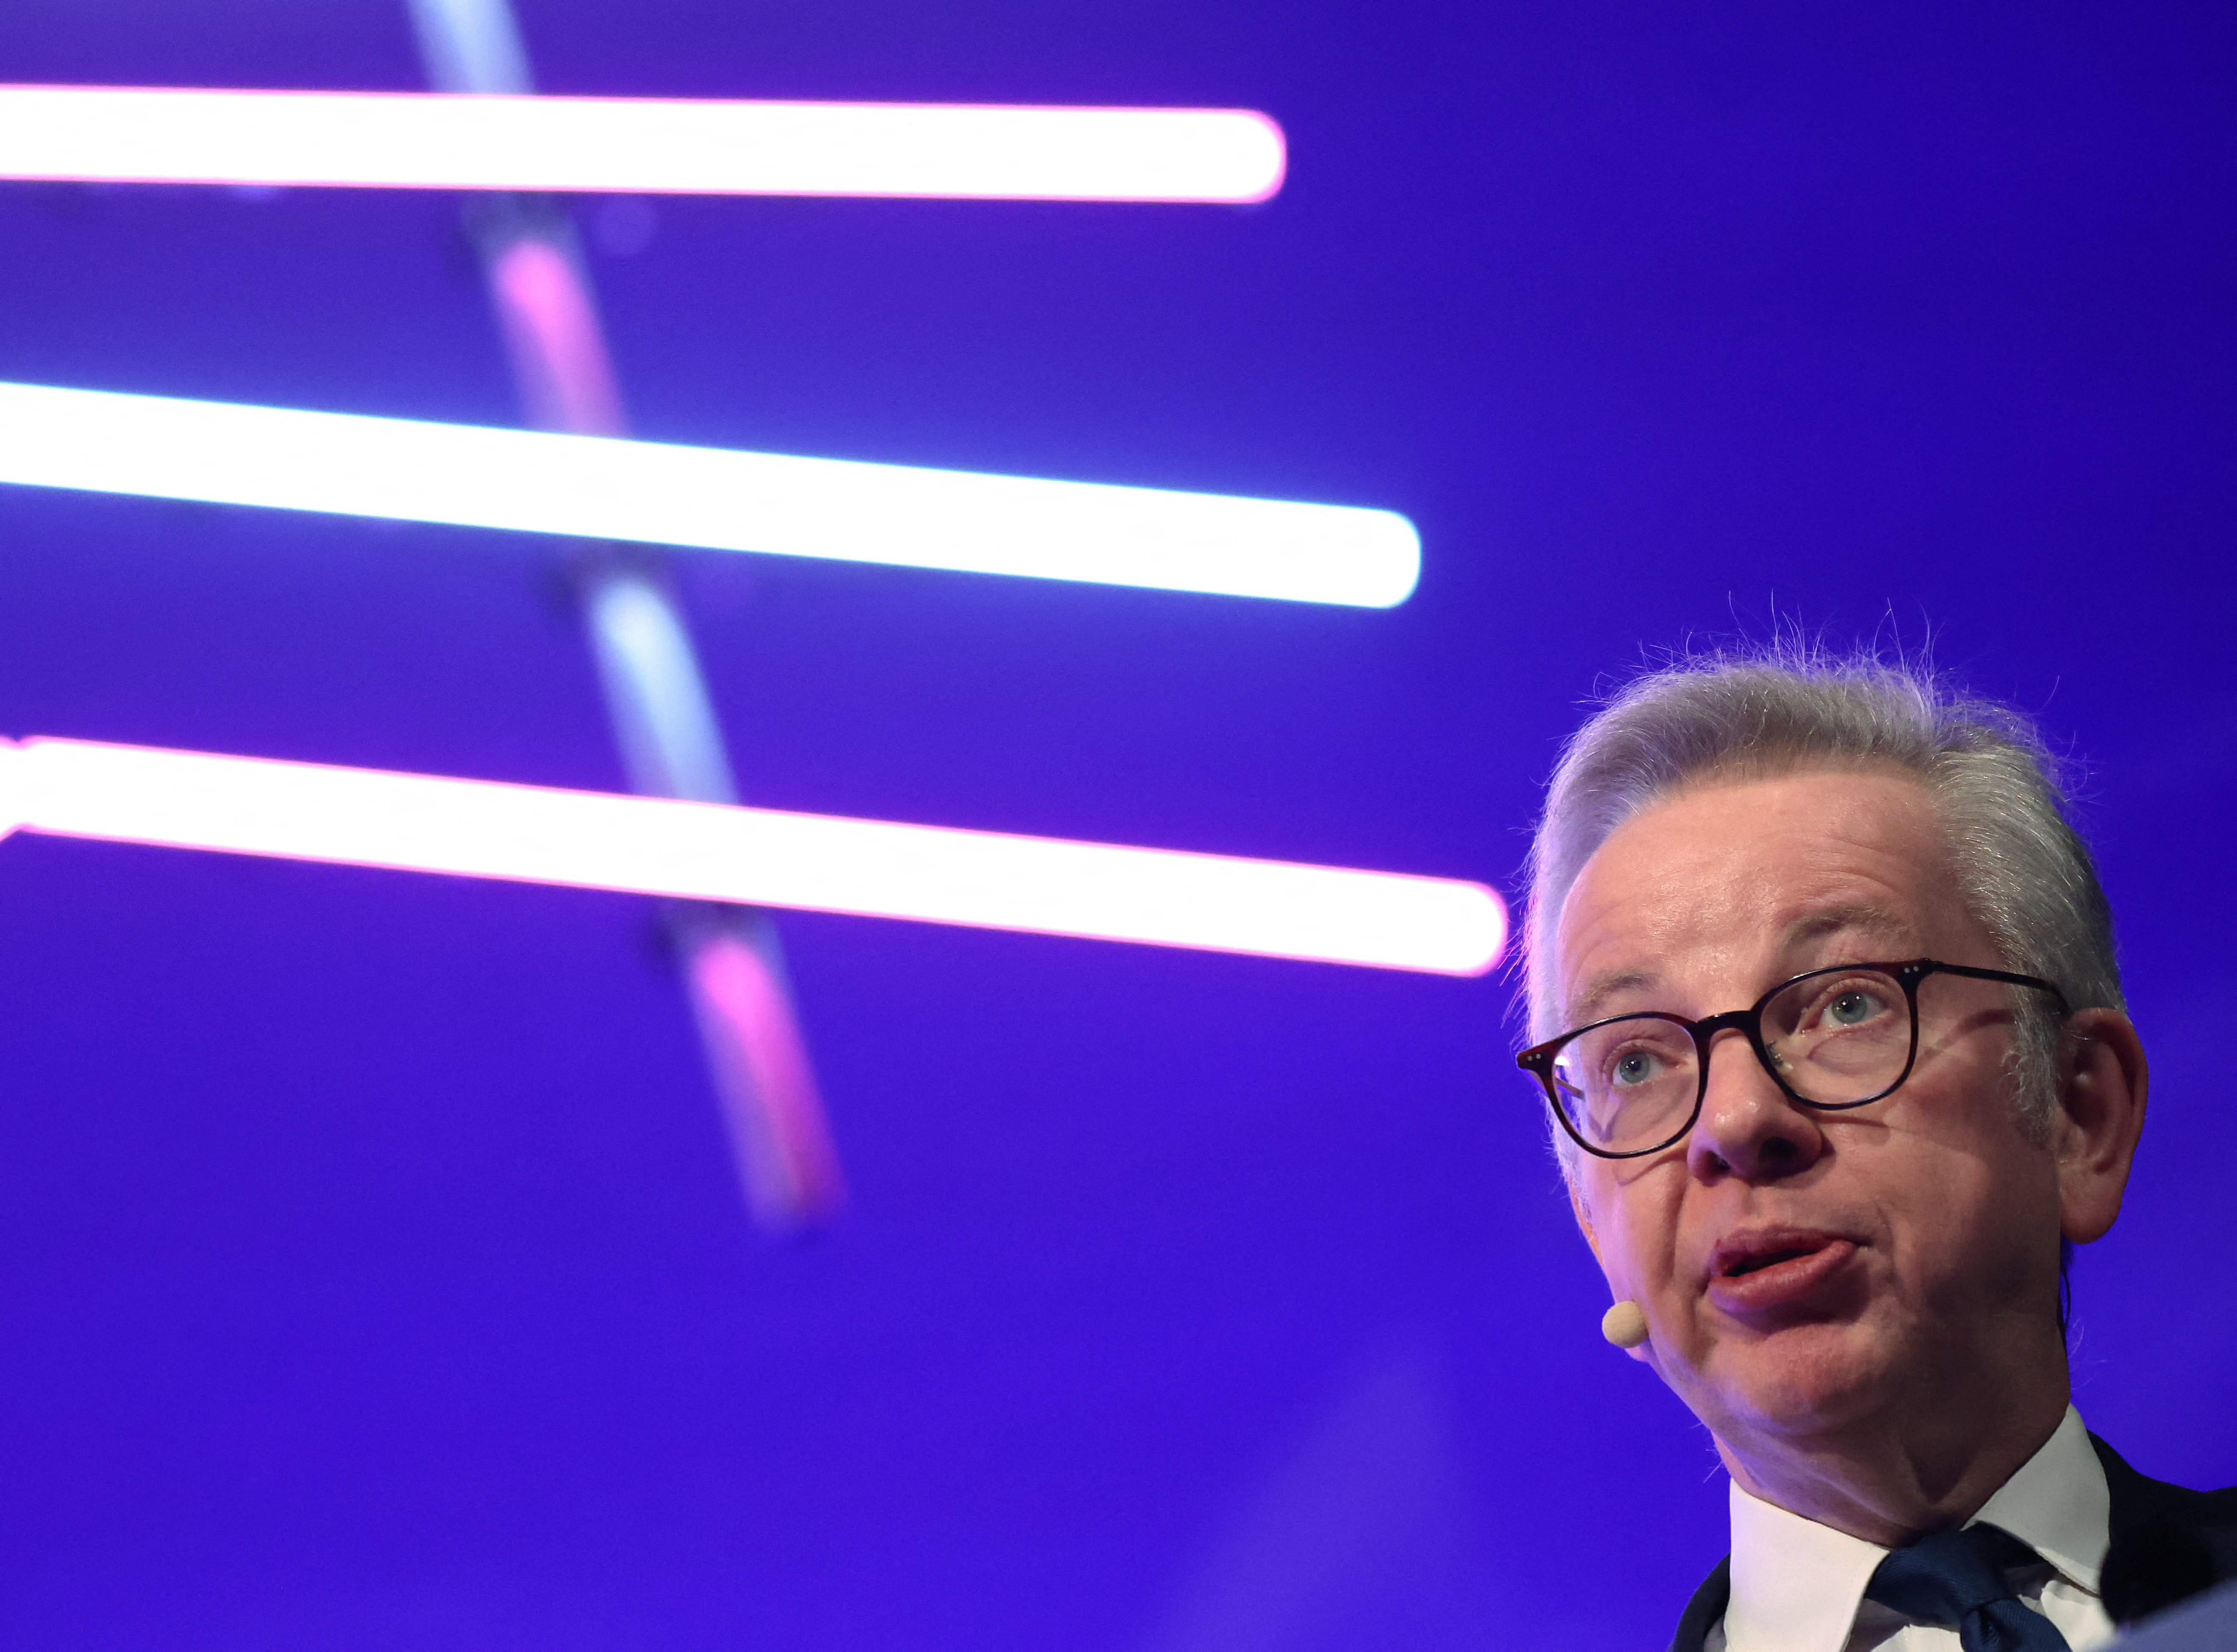 Michael Gove, Britain’s Secretary of State for Levelling Up, Housing and Communities during his speech in Manchester